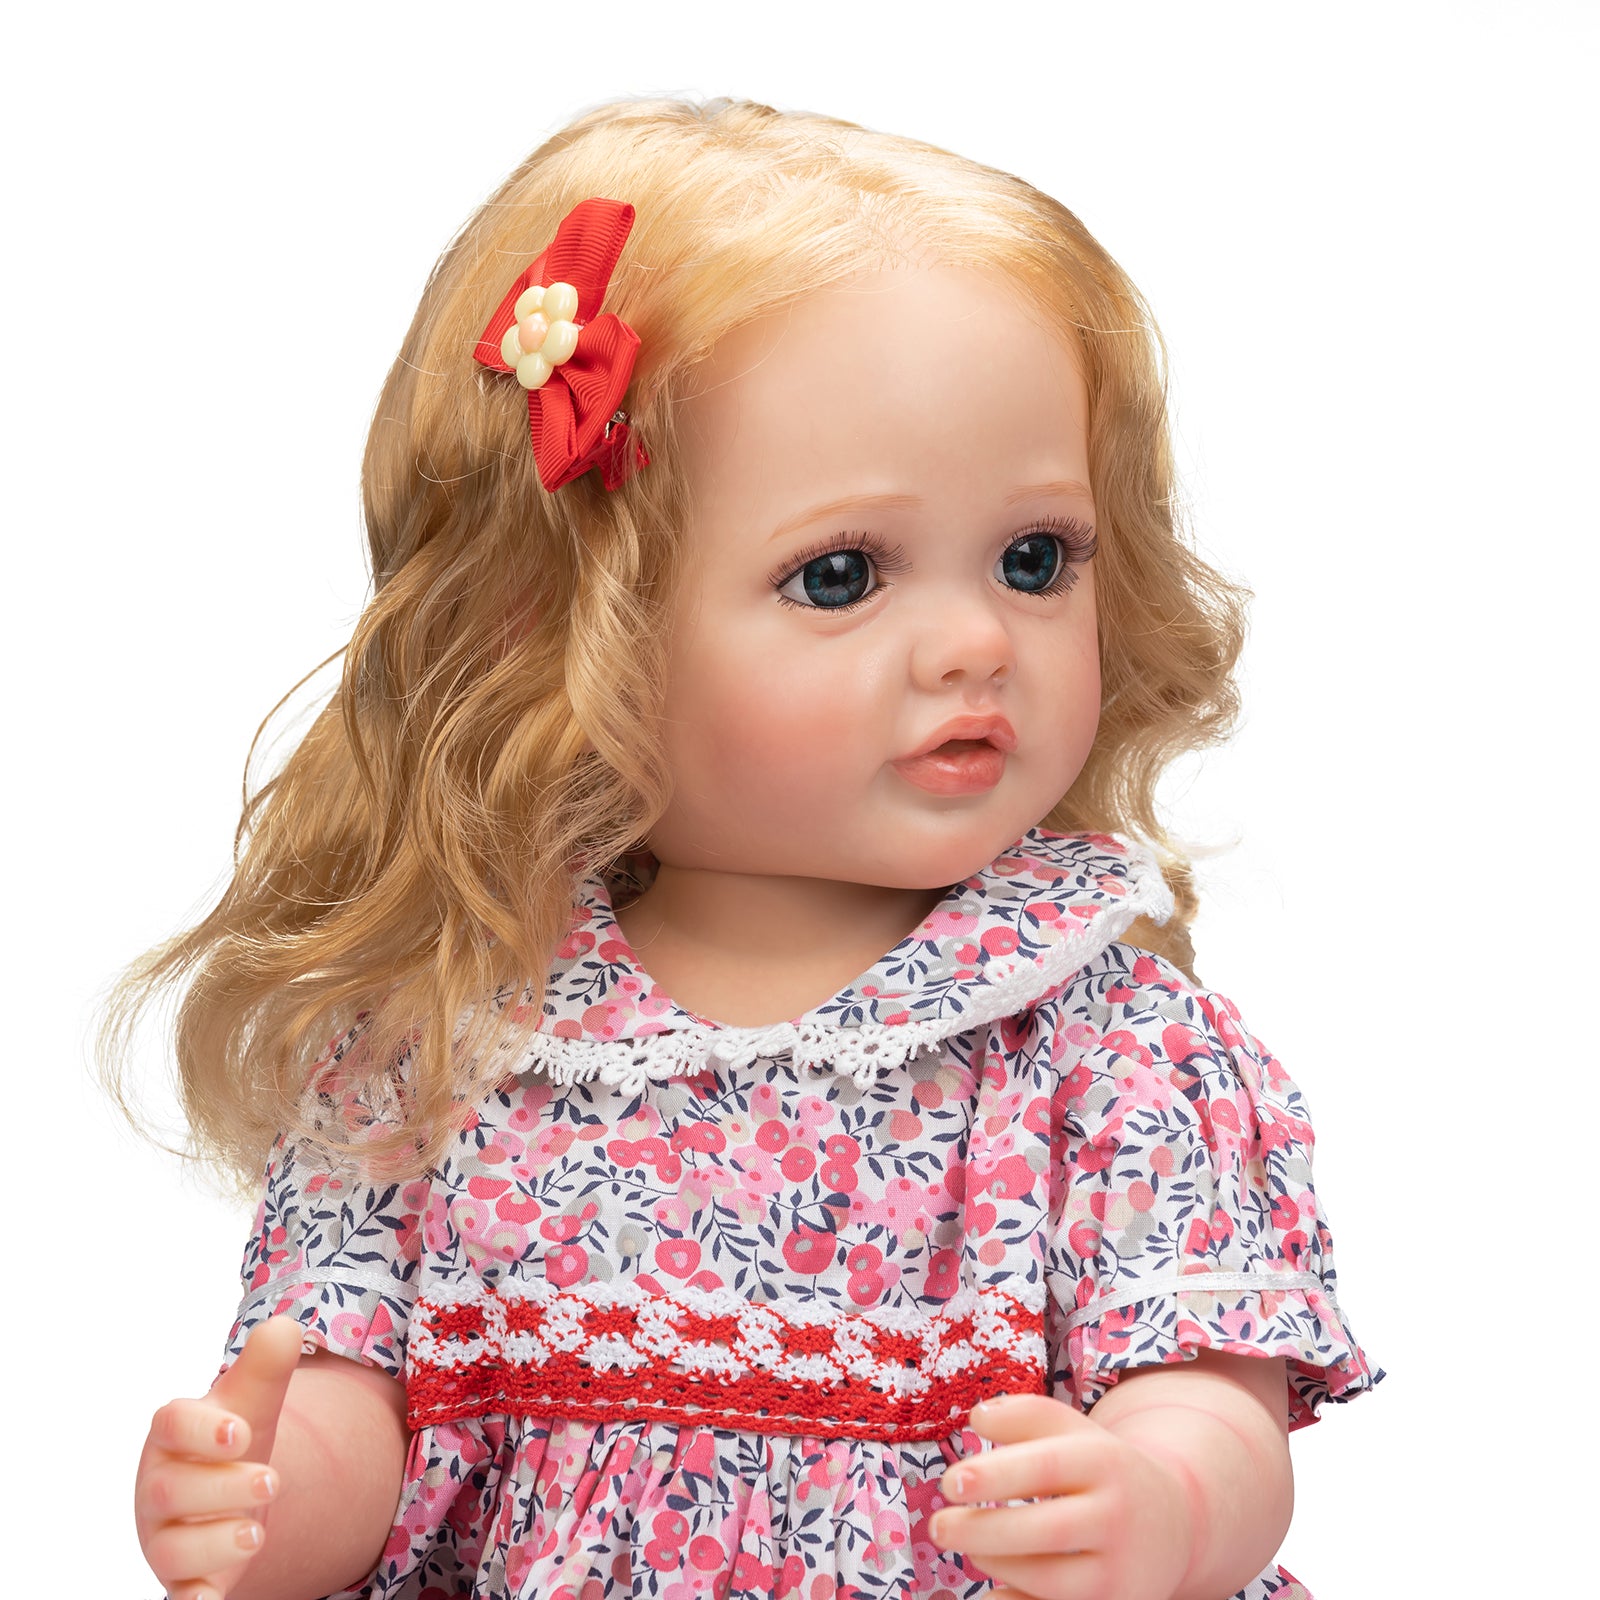 55cm | reborn baby dolls full body silicone lifelike baby dolls | reborn baby dolls | realistic baby dolls| newborn baby dolls | real life baby dolls | rebron baby dolls toddler | lifelike toddler dolls | therapy dolls for adults | anatomically correct baby girl doll | infant baby doll | gift for kids ages 3+ girl | weighted cloth body | birthday gift | collection | girl | boys |  mother | daughter | granddaughter | sleeping |real look real baby dolls that look real looking | reborn toddler dolls | mnmj